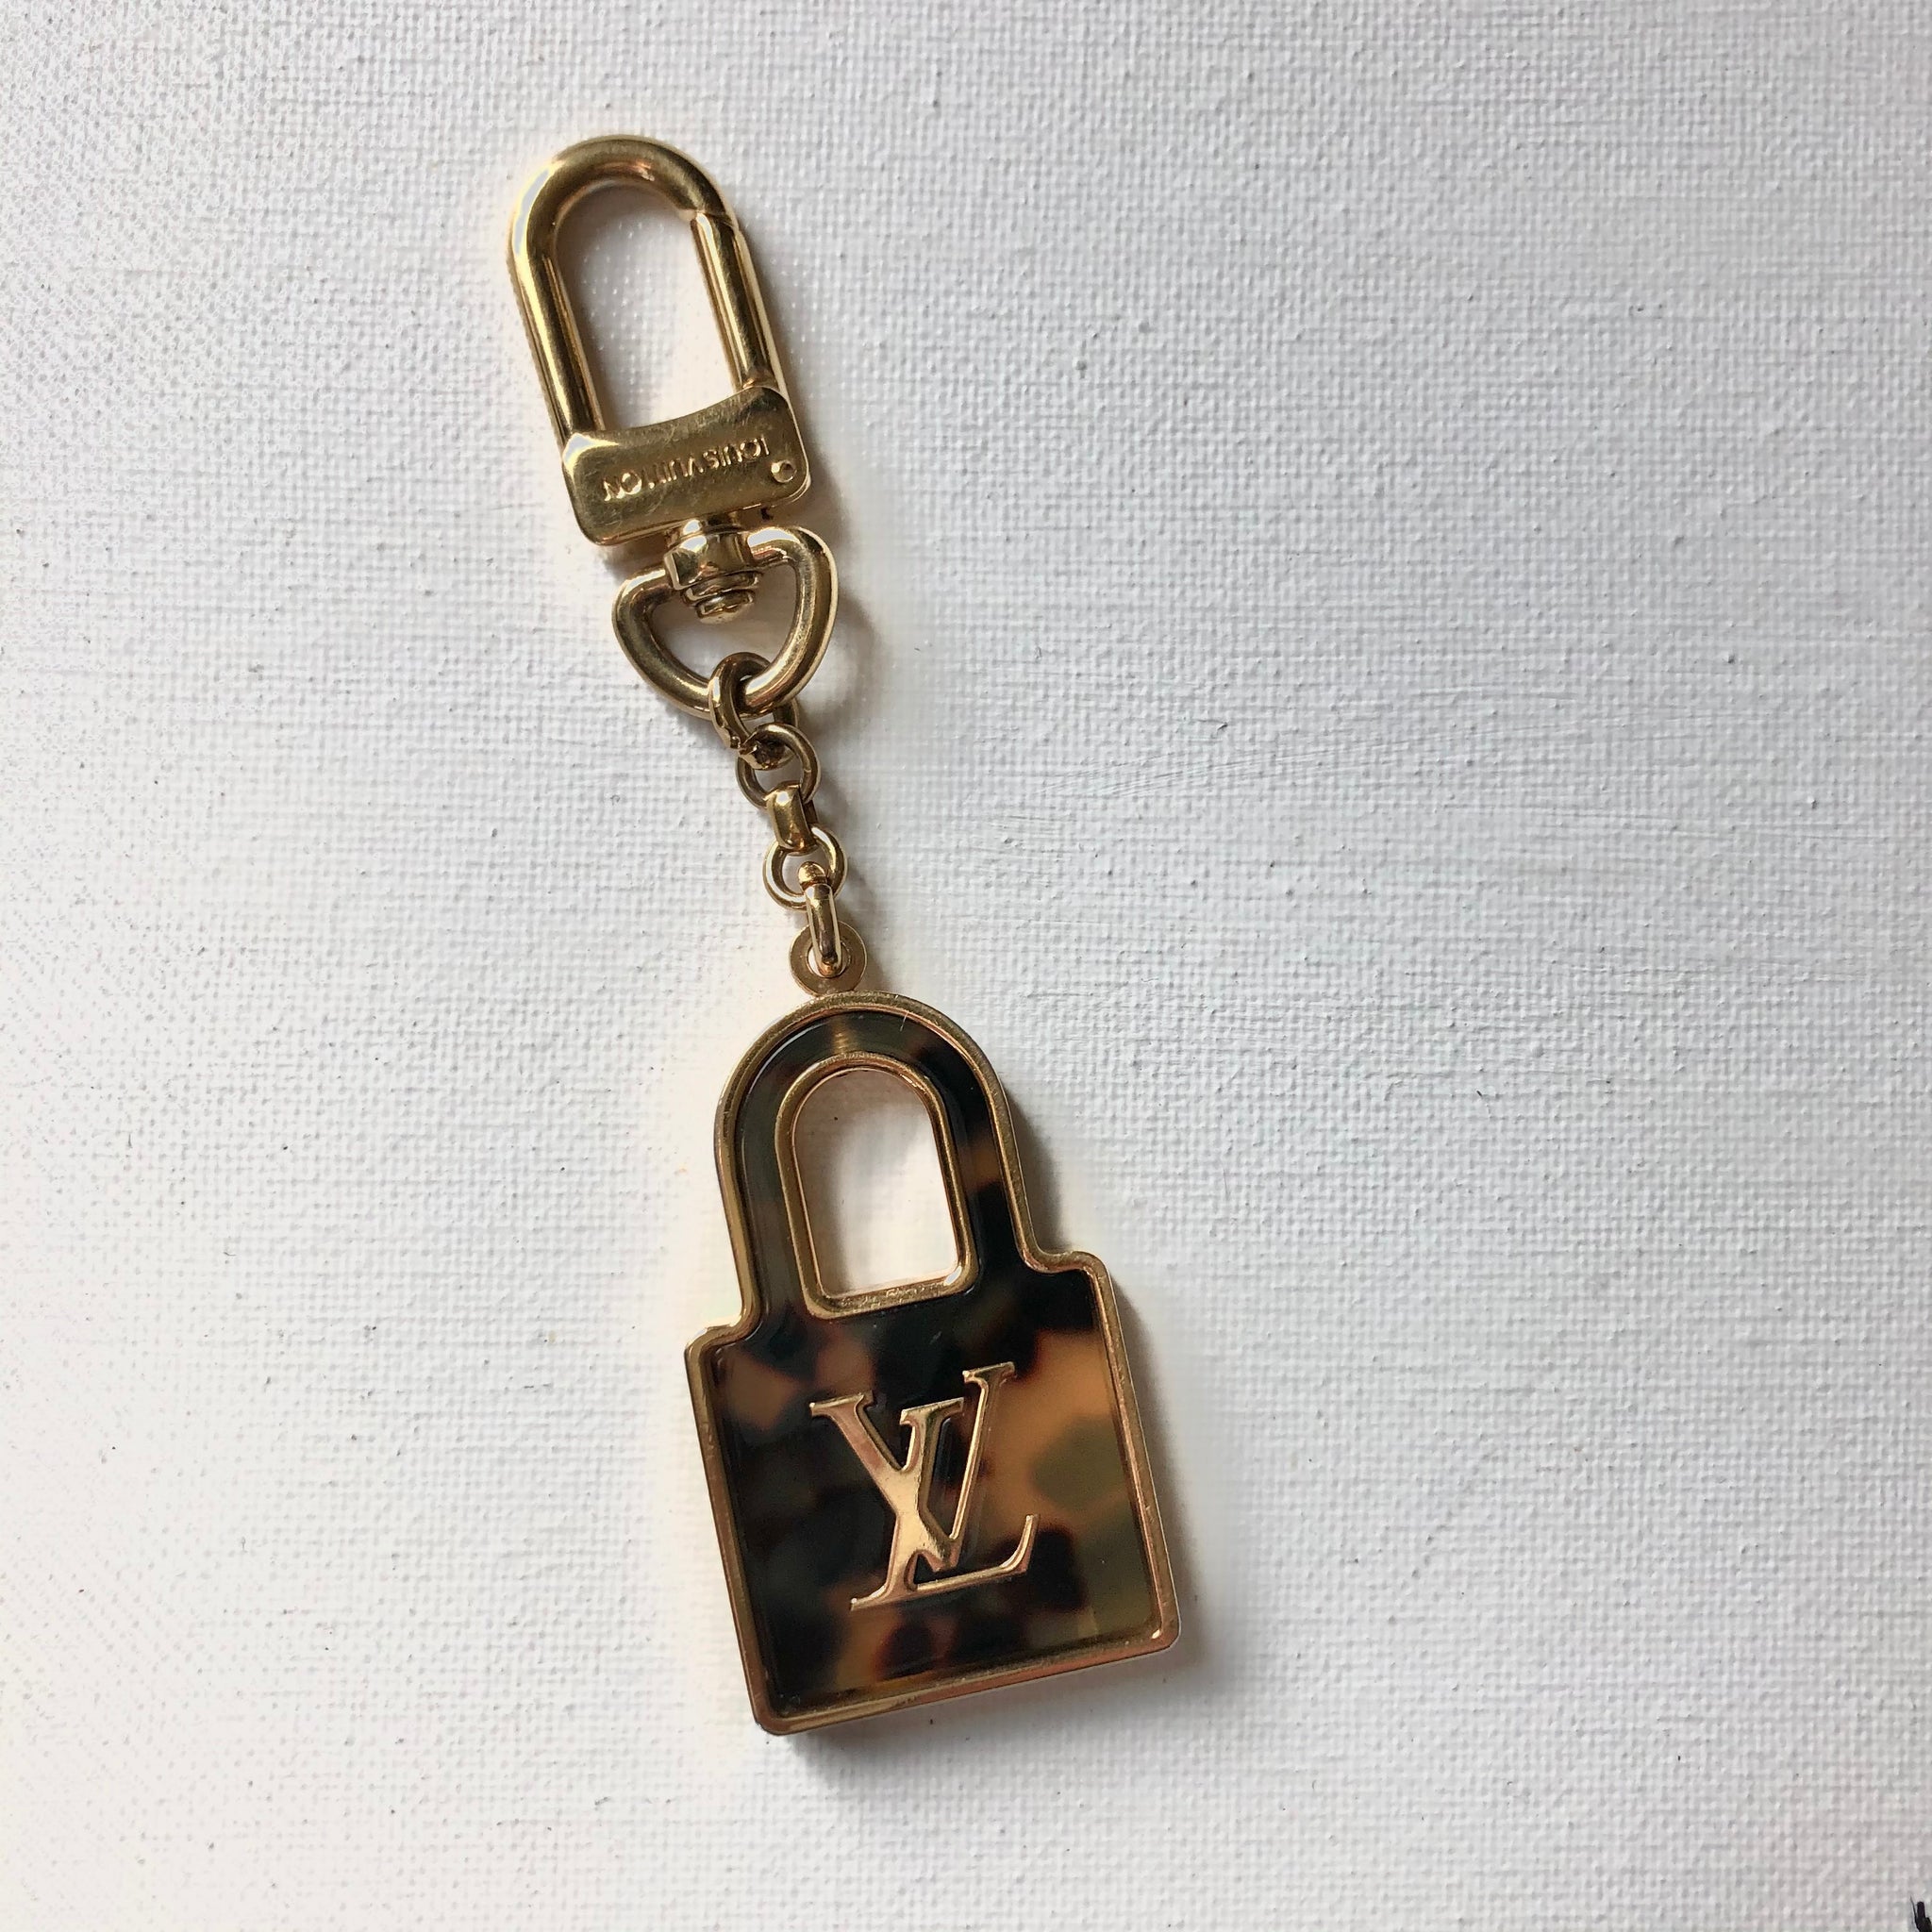 New Authentic Louis Vuitton PadLock Lock & Key for Bags Gold # 677 